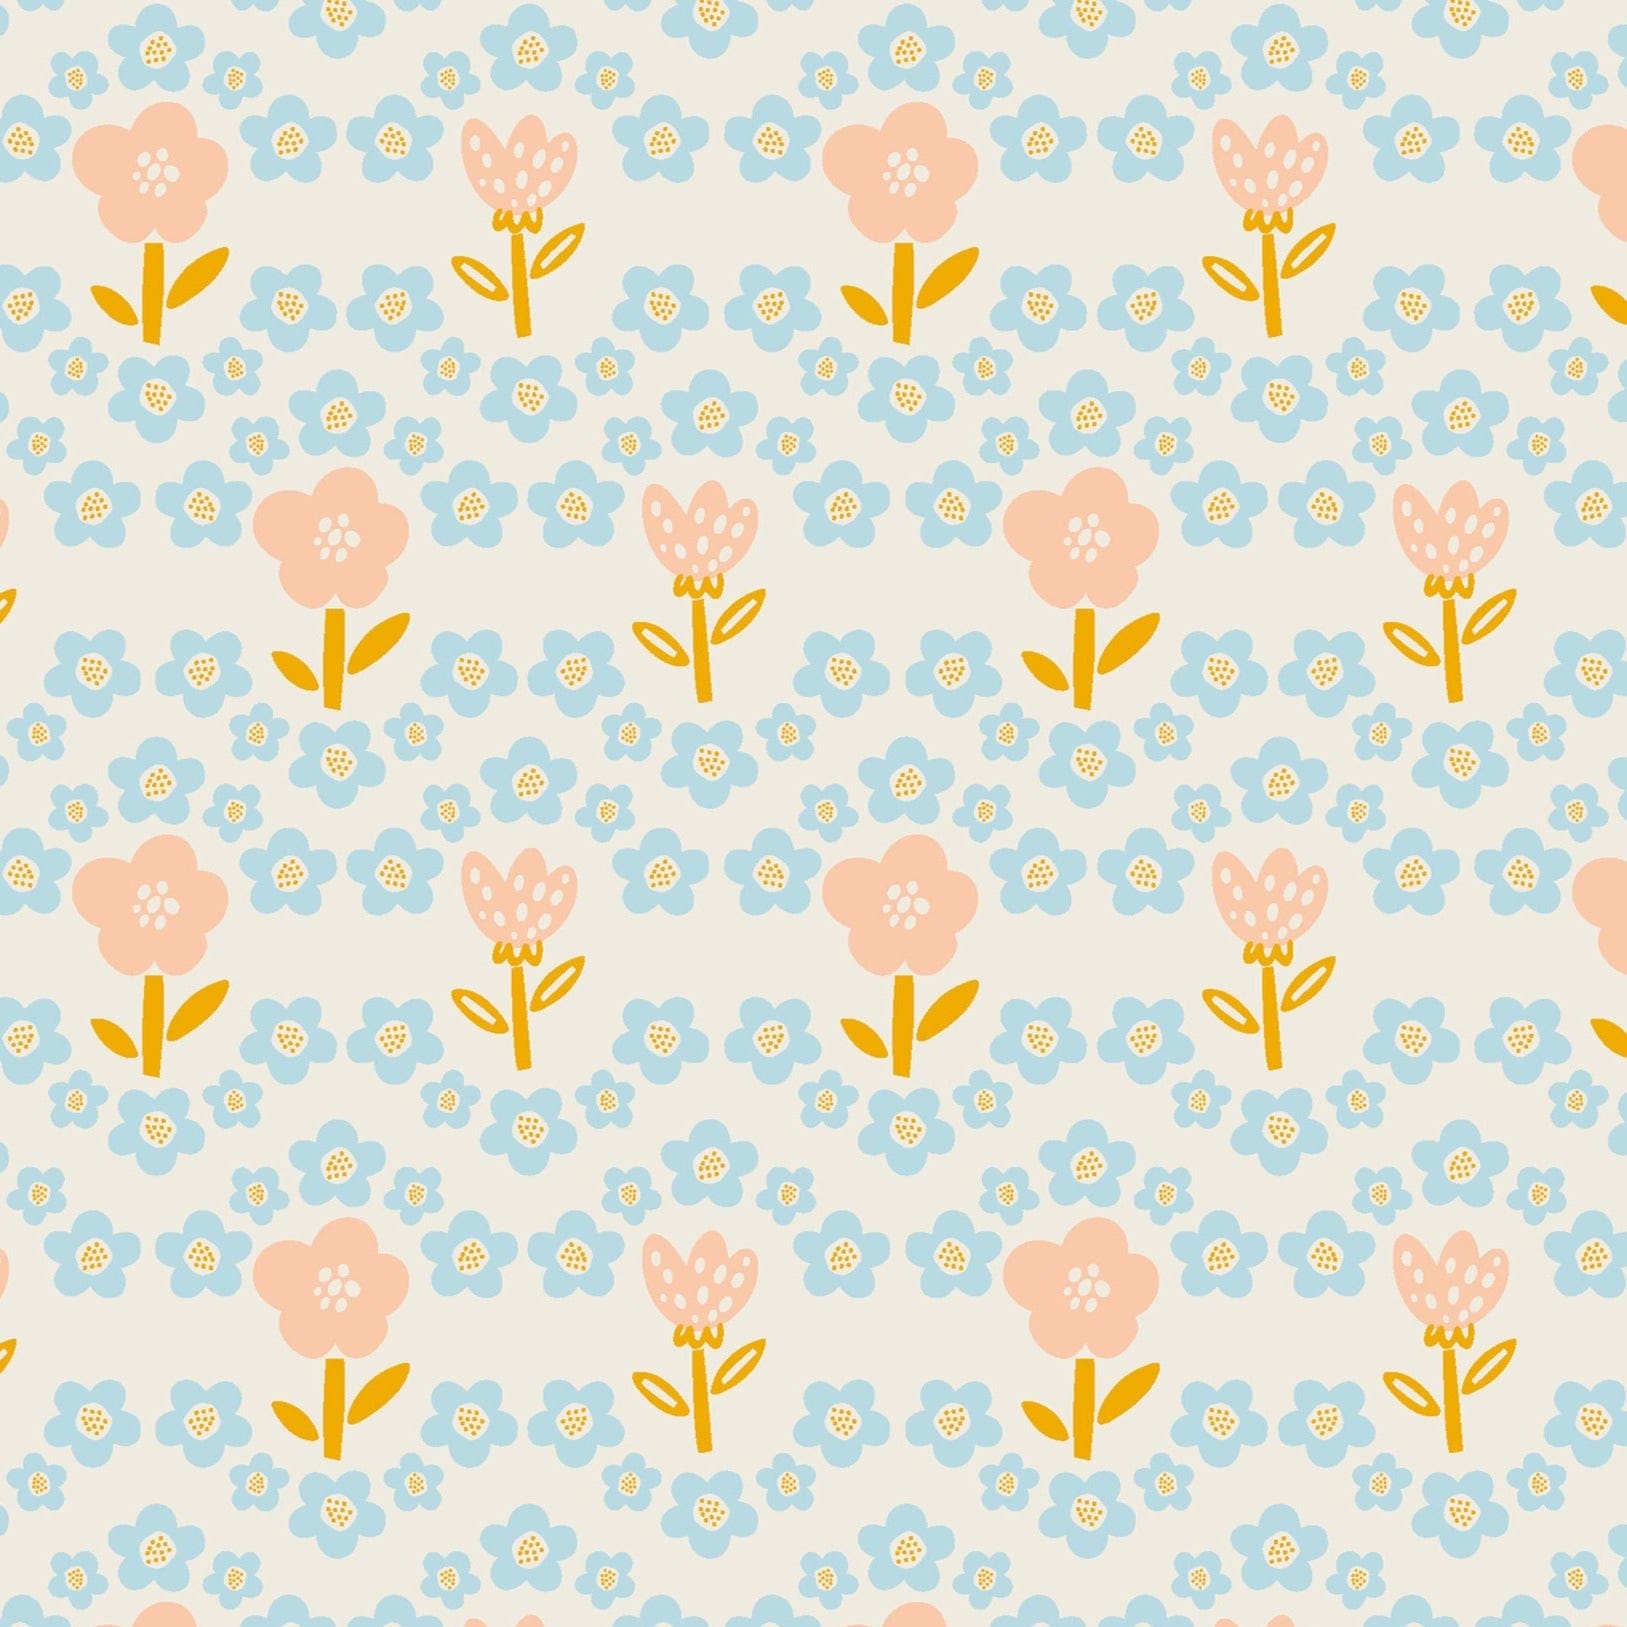 A close-up view of the Baby Spring Wallpaper, showcasing its charming pattern of small blue and pink flowers intermixed with soft green leaves, set against a light background, ideal for a fresh and soothing nursery or playroom.